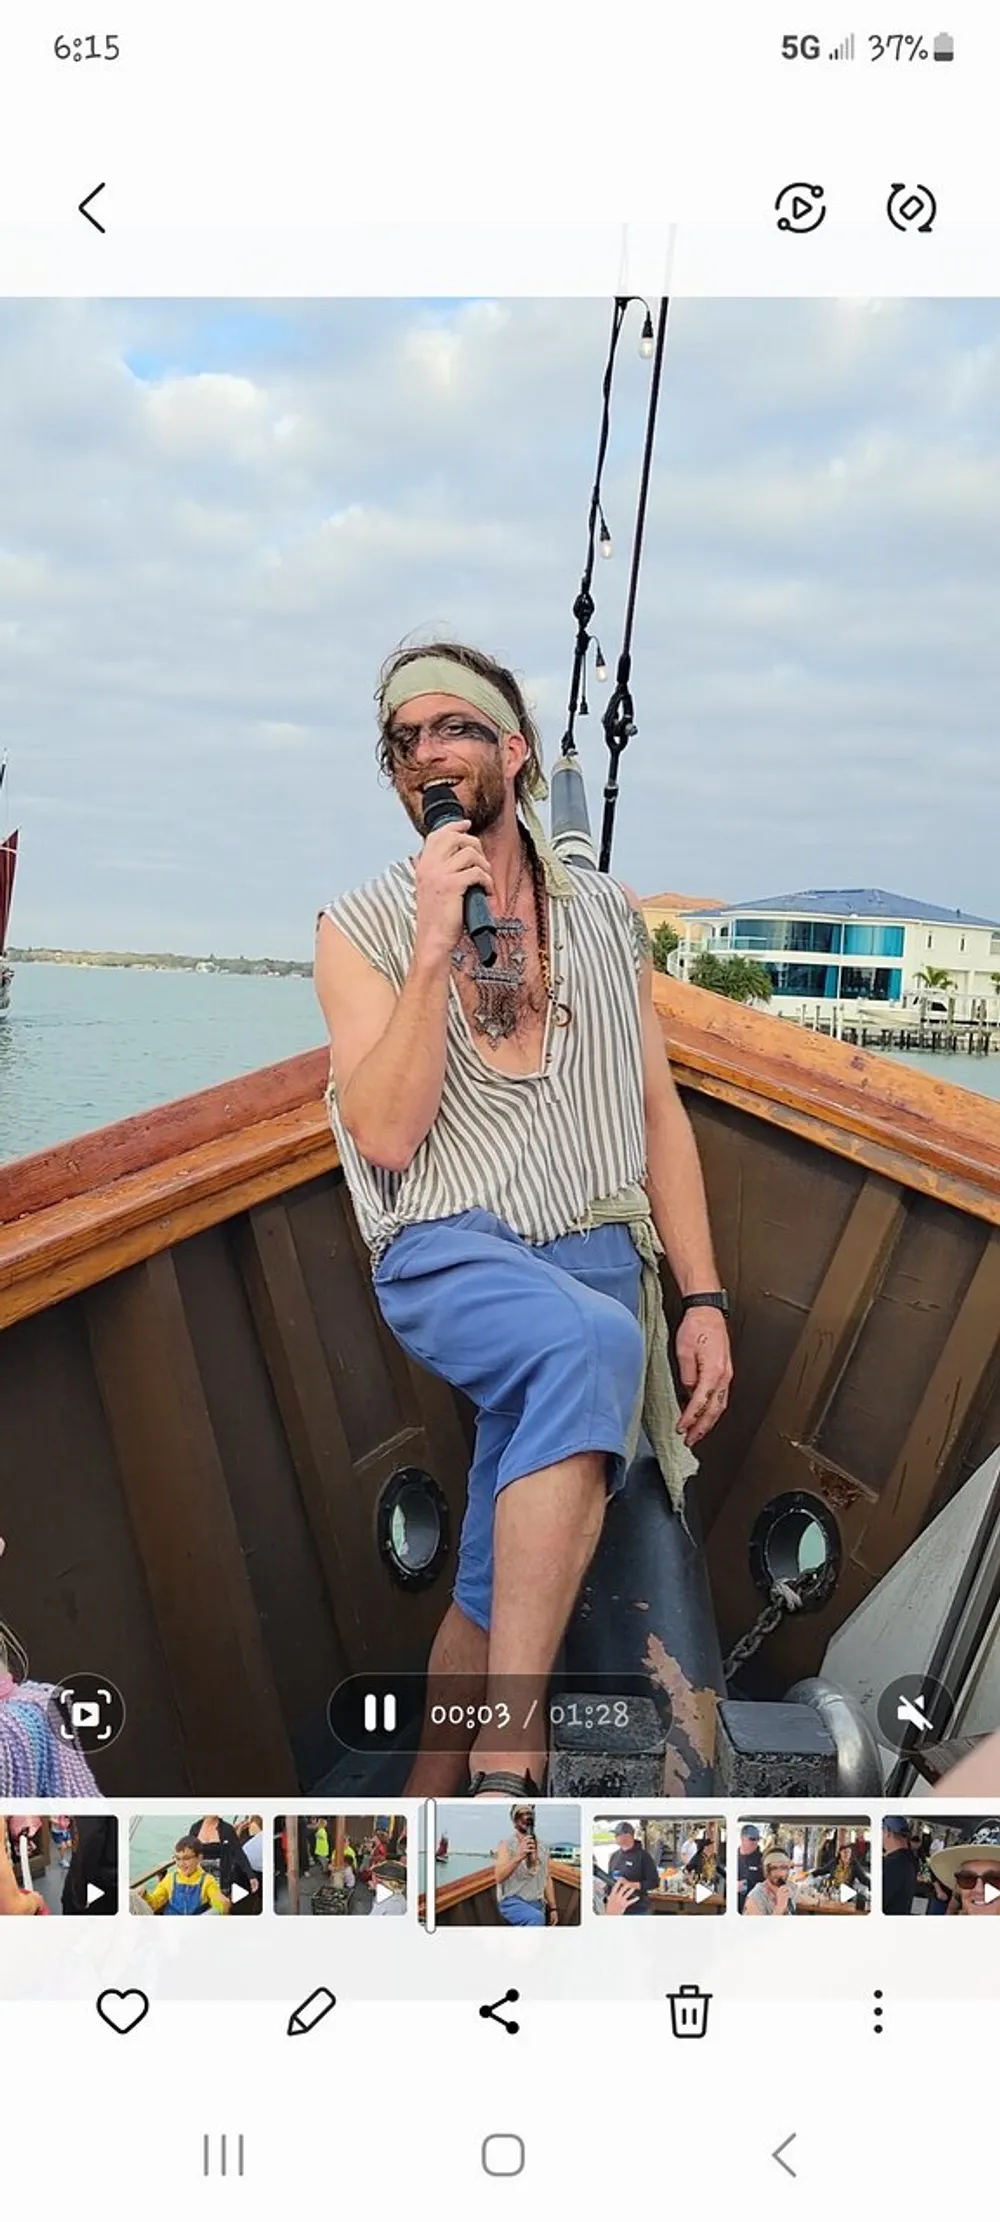 A person dressed as a pirate is sitting on the edge of a boat speaking into a microphone with a playful expression